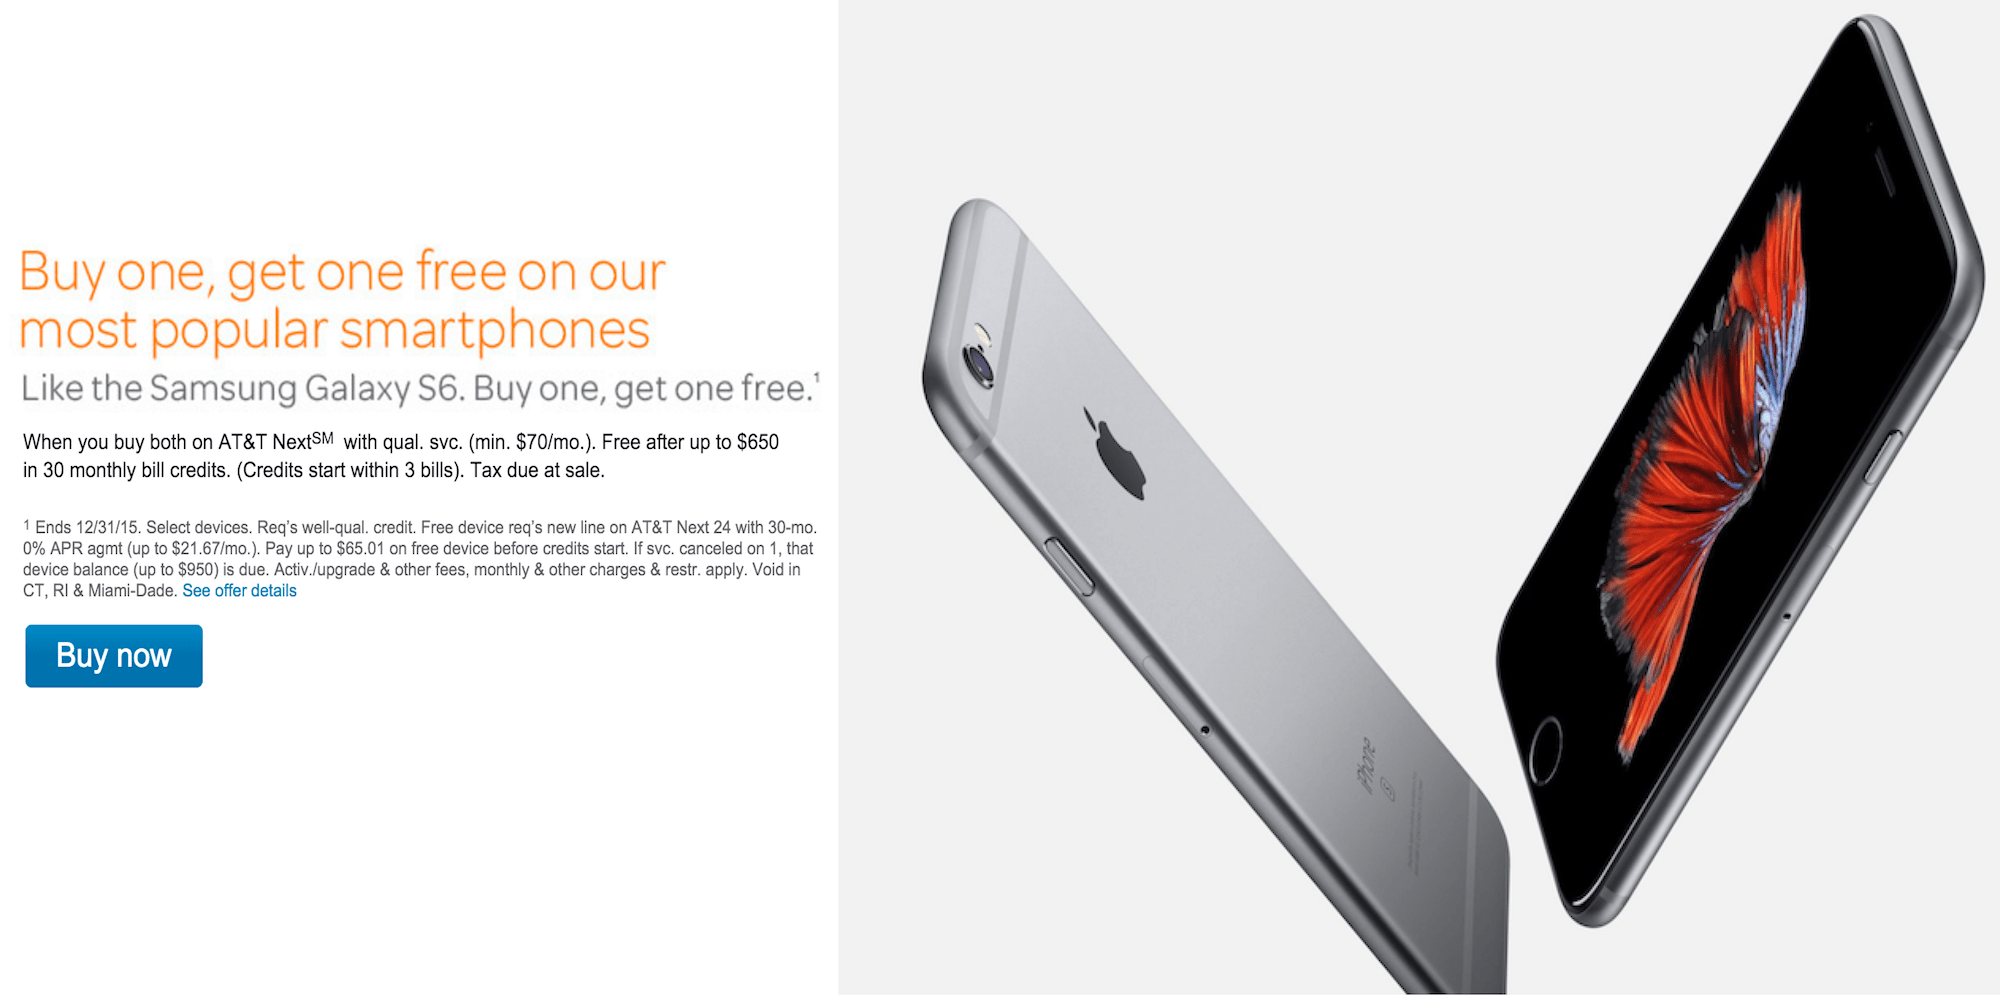 AT&T is quietly offering buy one, get one free deal on the iPhone 6s